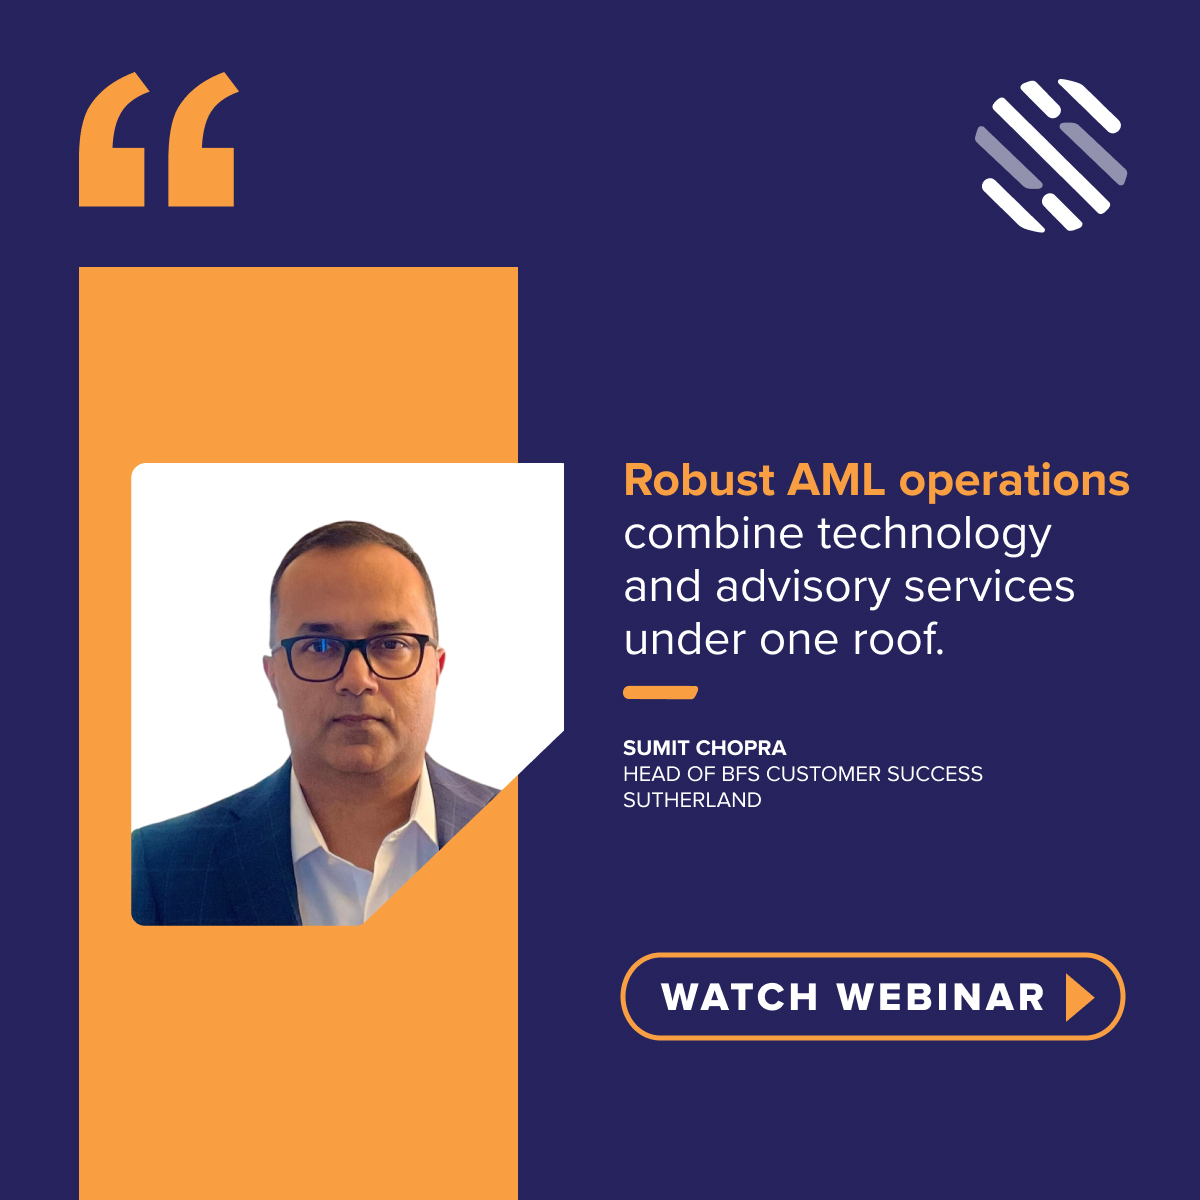 Enhancing your AML operations can streamline processes, reduce unnecessary effort, and decrease reputational risk when aligned with your overall business value. Catch our on-demand webinar to find out how. bit.ly/3PtNDfN #AML #Compliance #Webinar